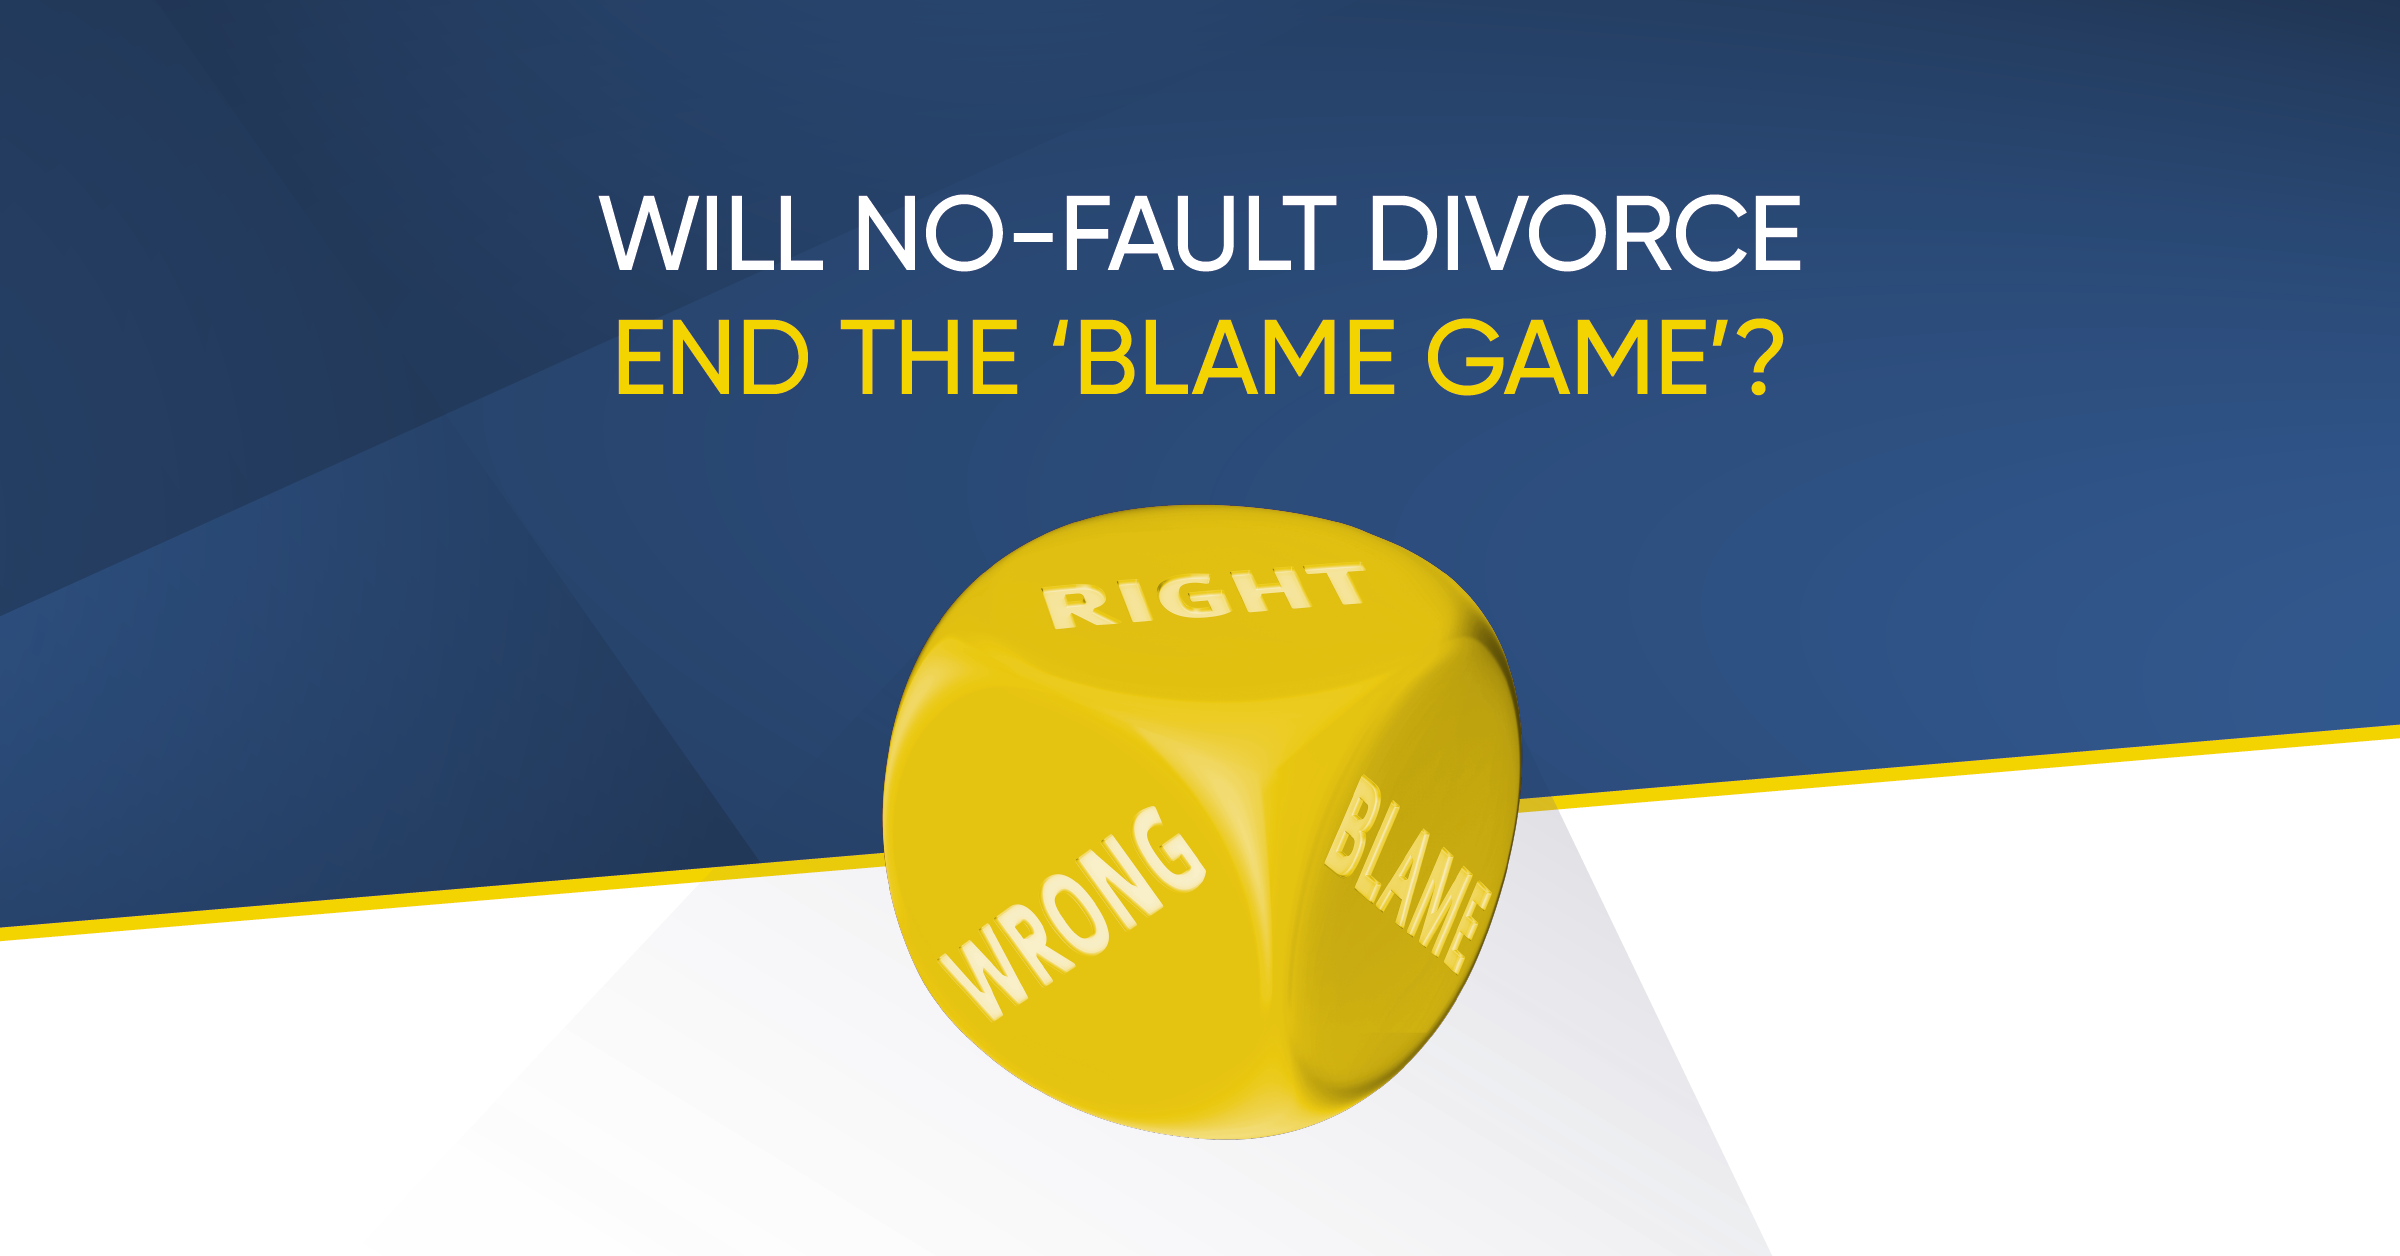 will no-fault divorce end the 'blame game'